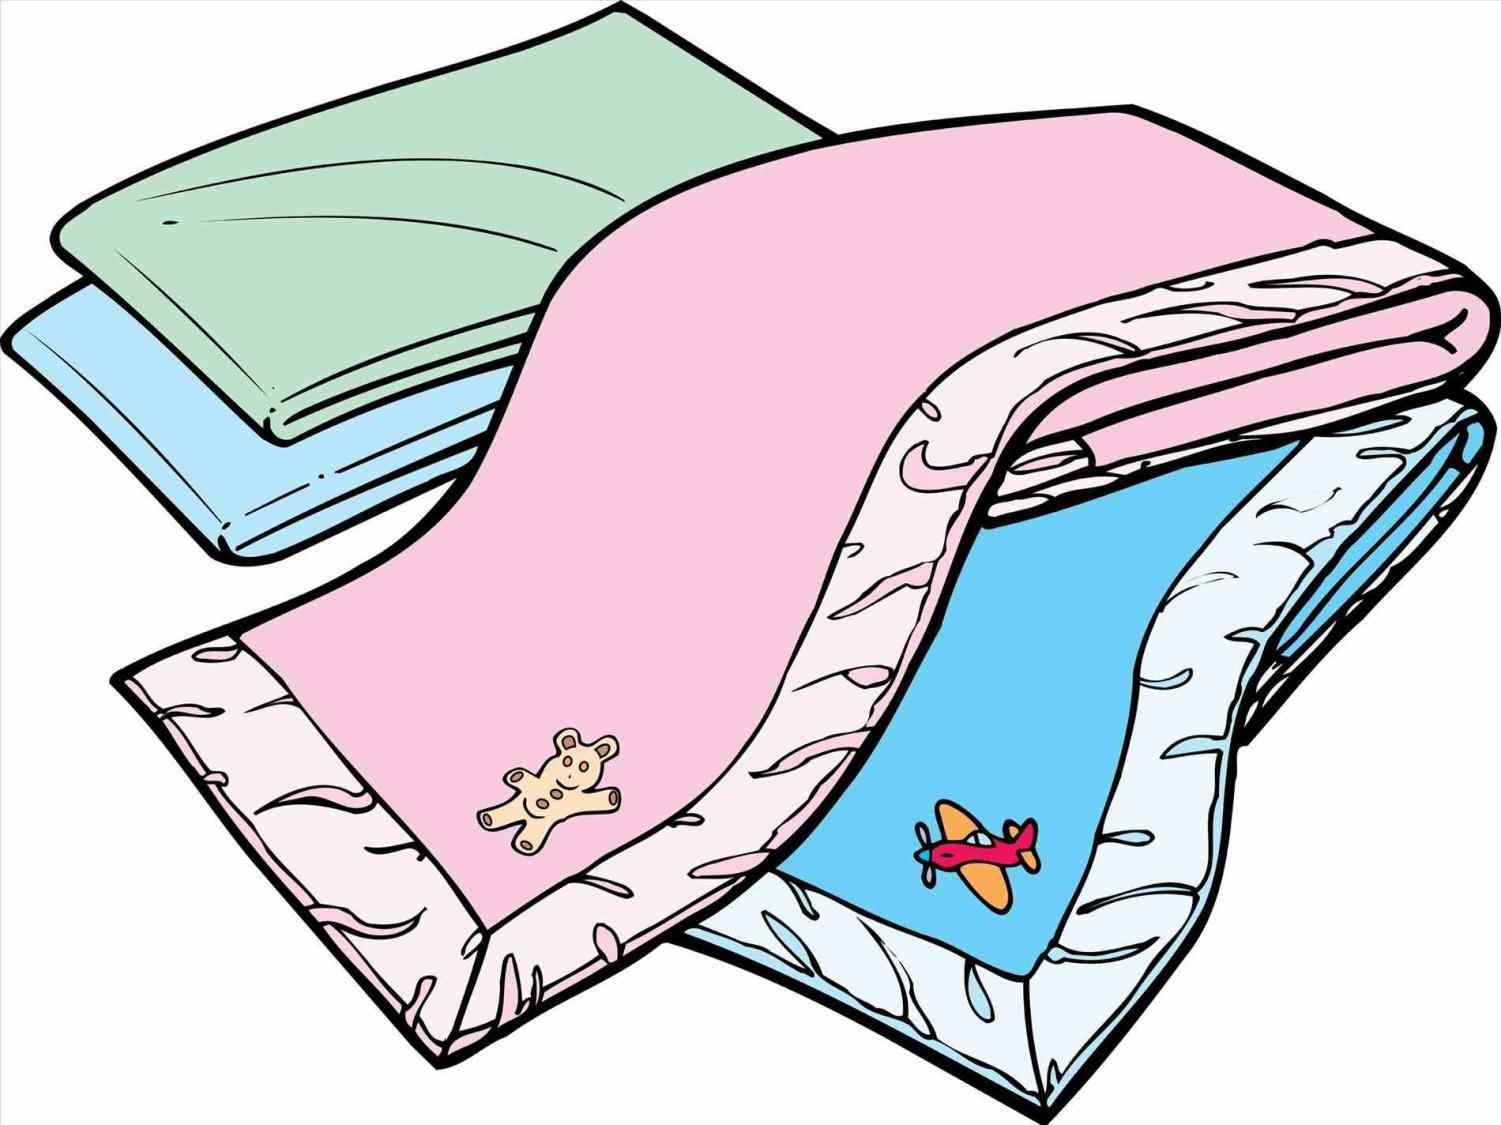 Towel blankets pencil and. Blanket clipart folded blanket